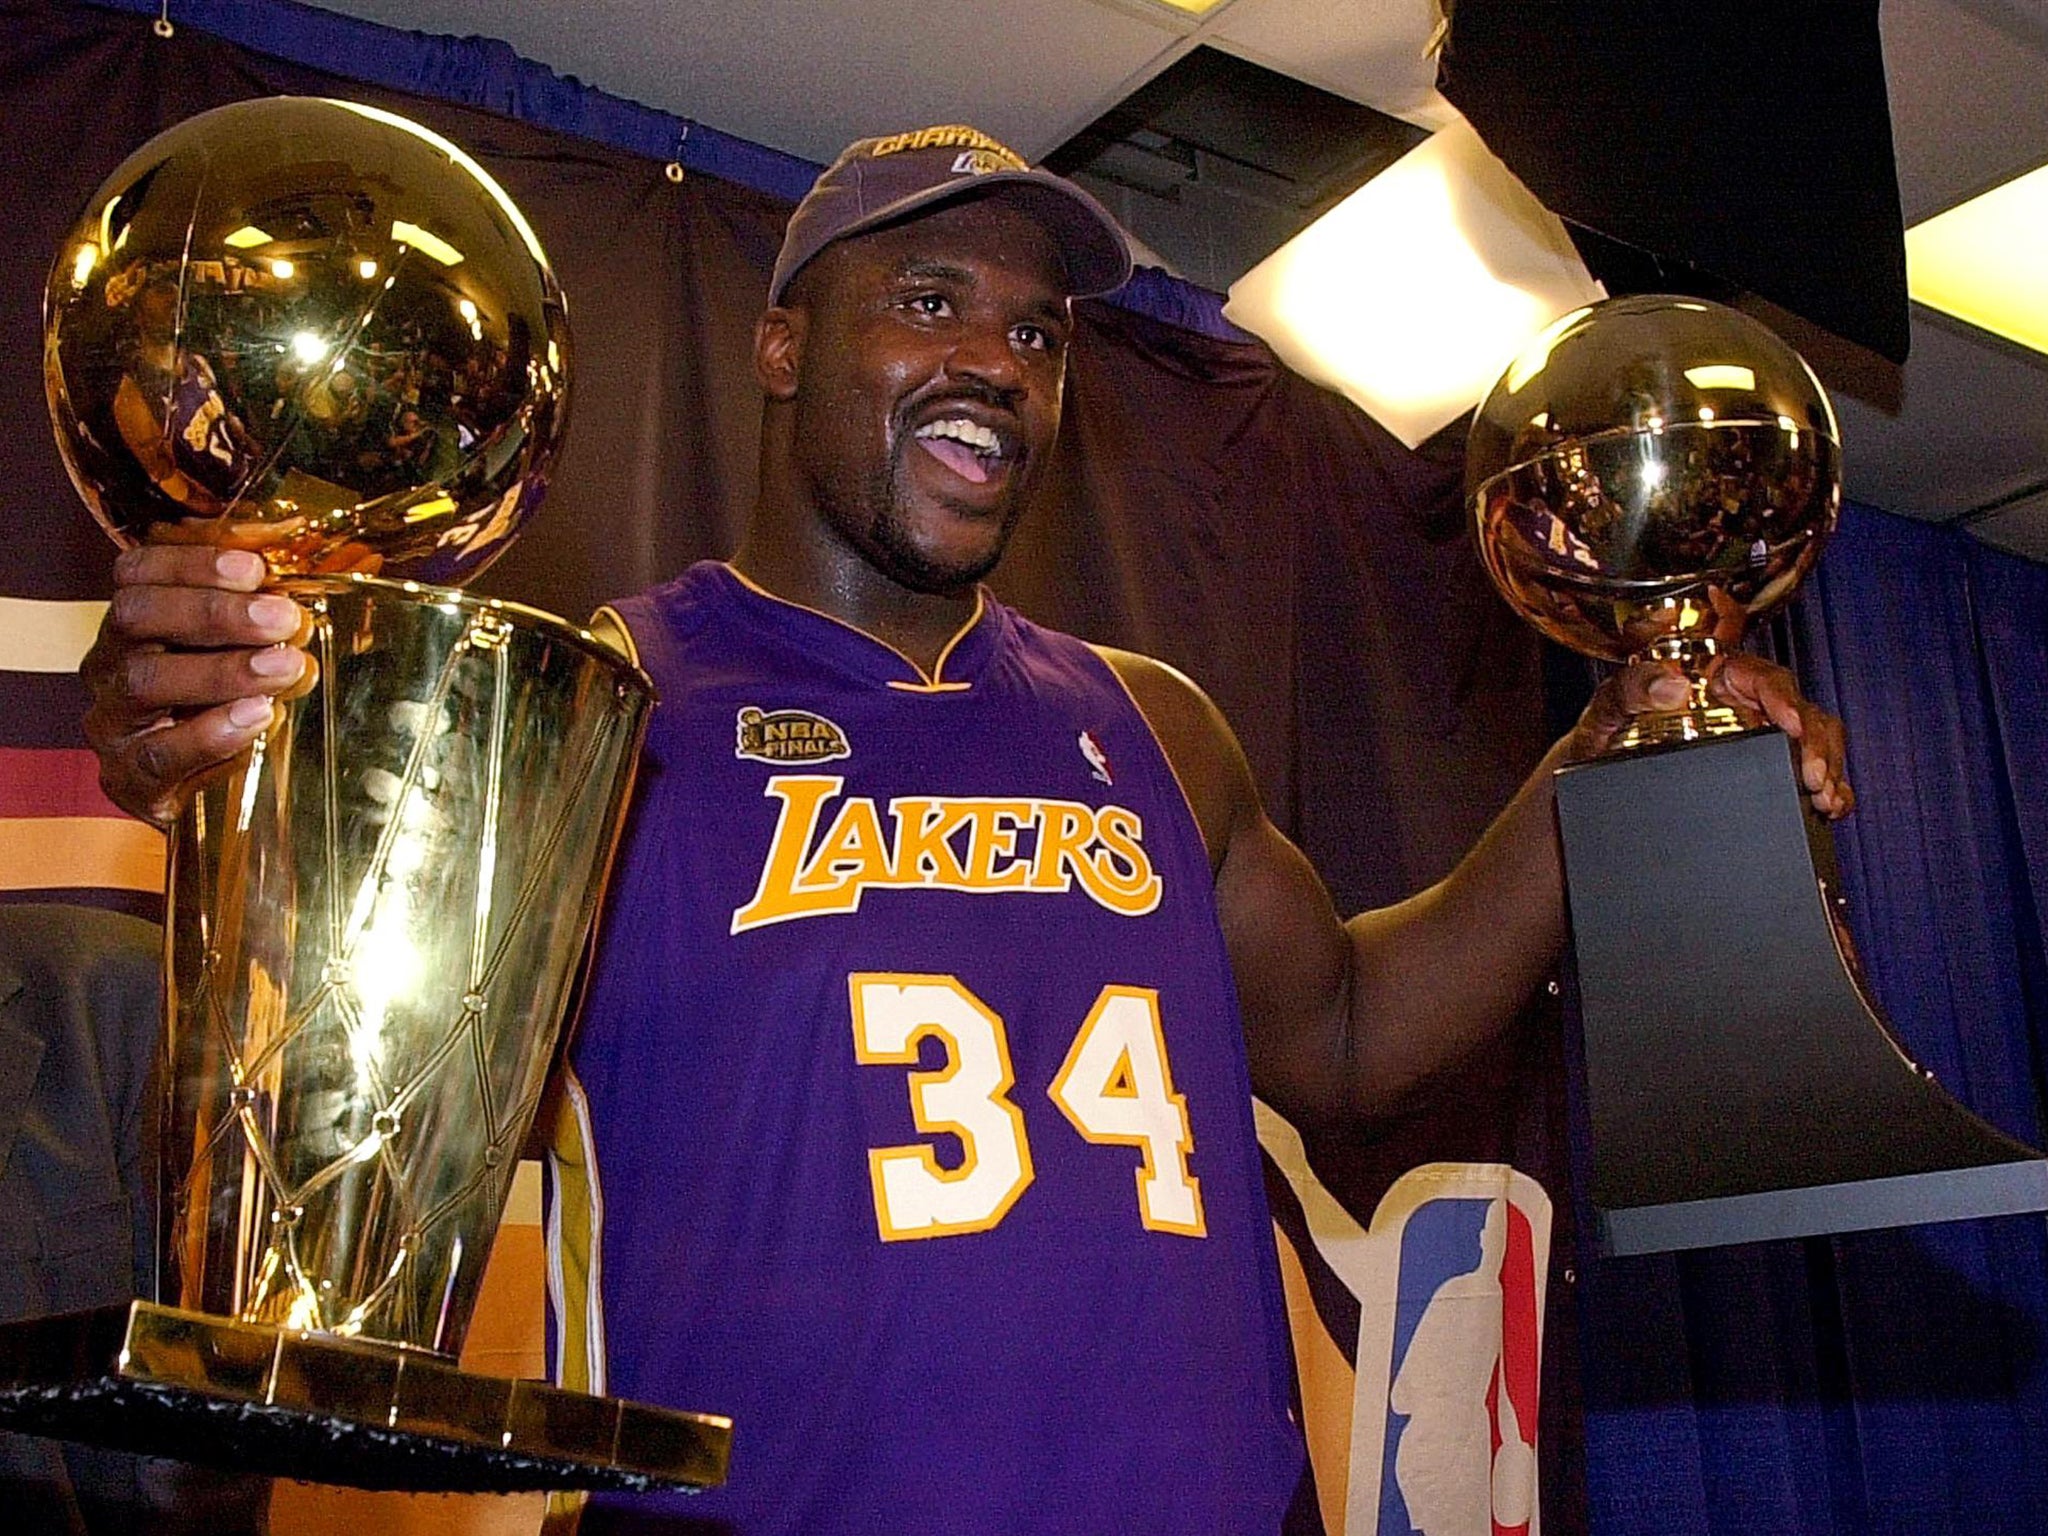 &#13;
Shaq left for the Lakers in 1996 - he would win three successive titles in Los Angeles&#13;